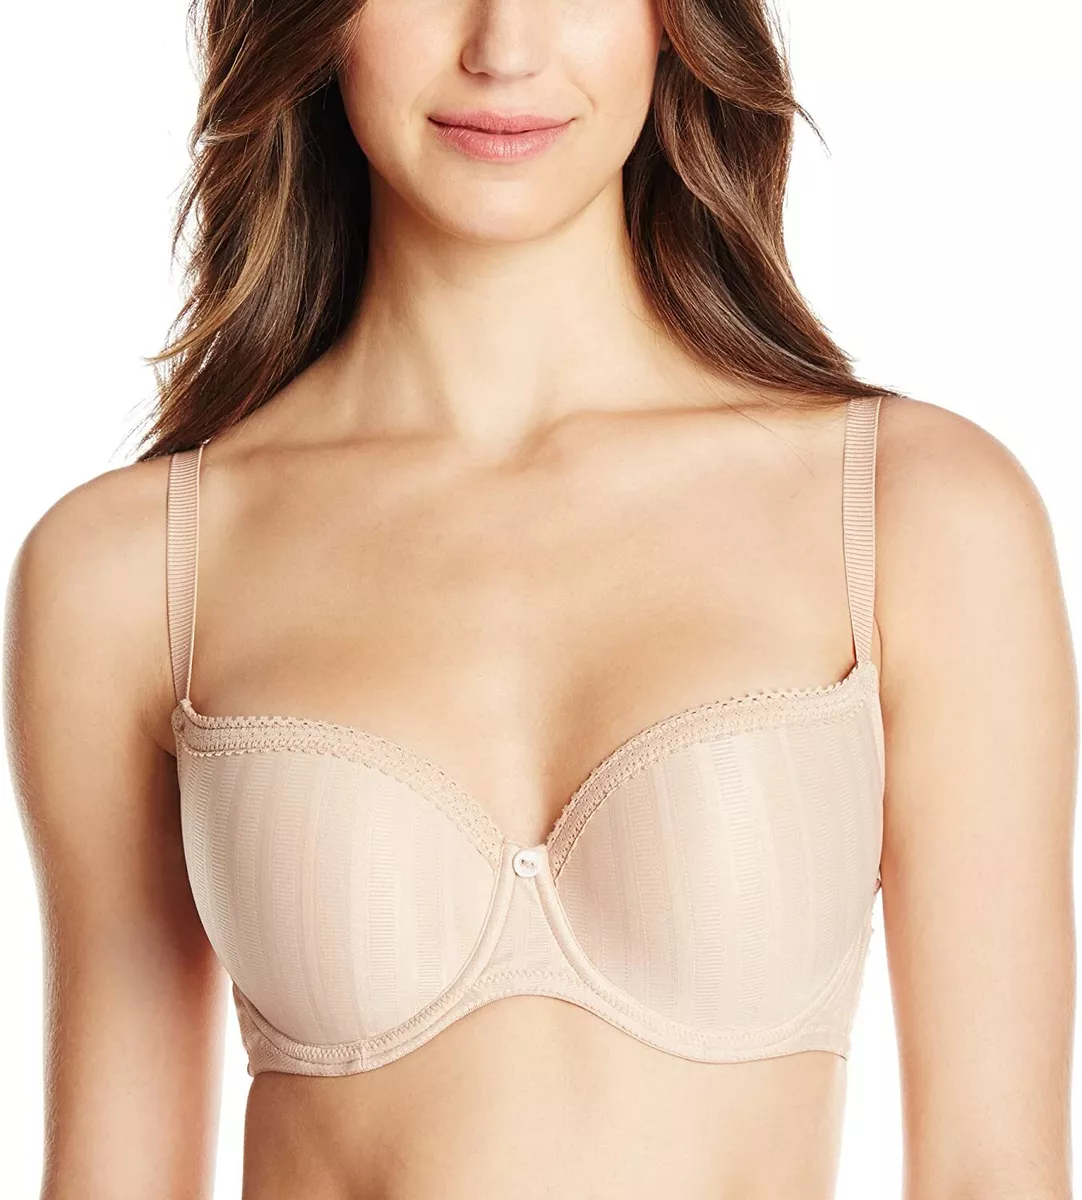 Size 30d T Shirt Bra - Get Best Price from Manufacturers